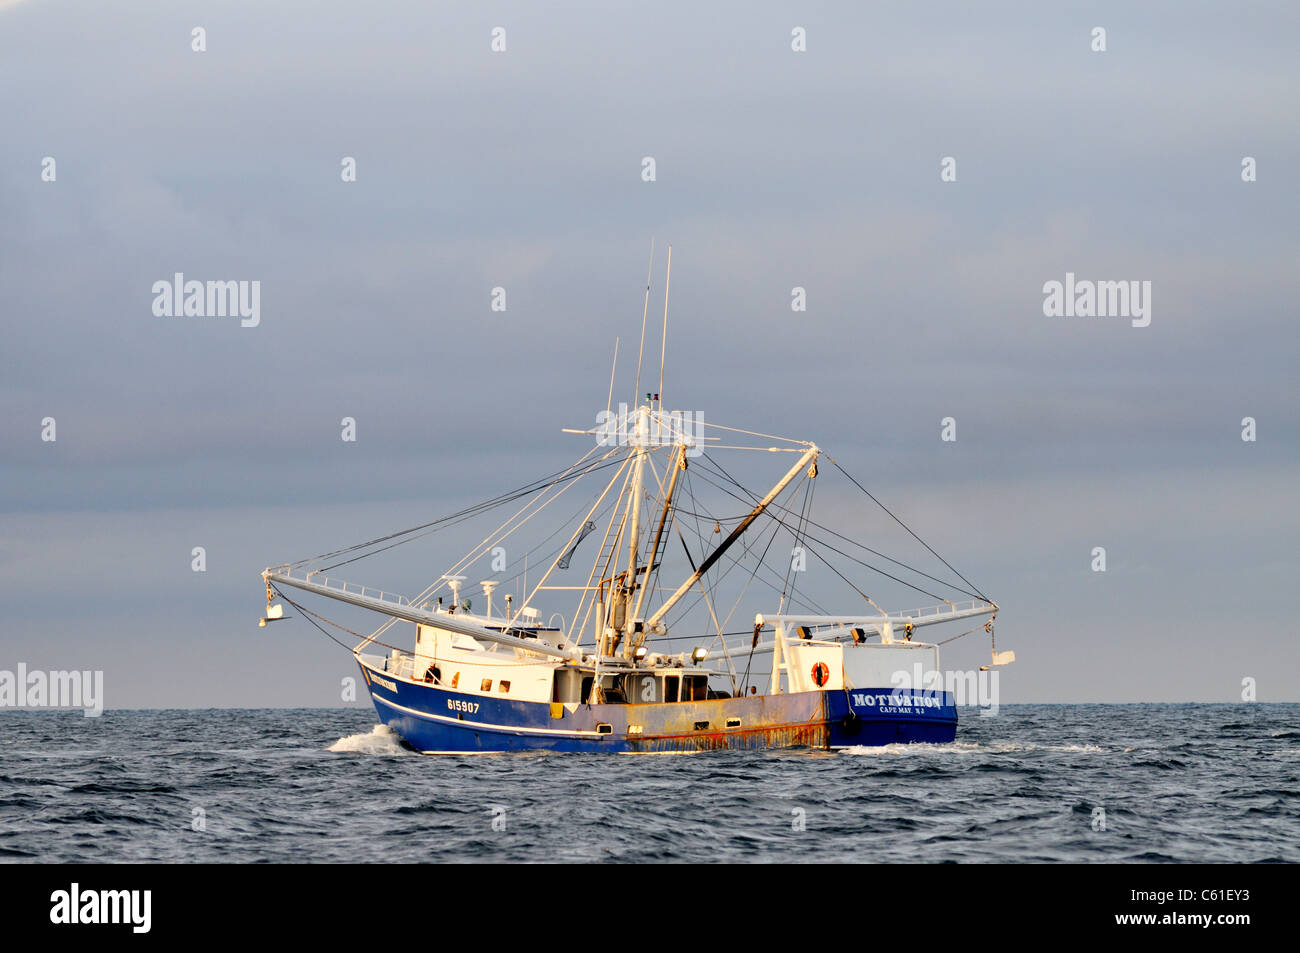 Blue hulled trawler fishing boat off the coast of Cape Cod in Buzzards Bay, USA with outriggers extended for trawling nets for fish Stock Photo